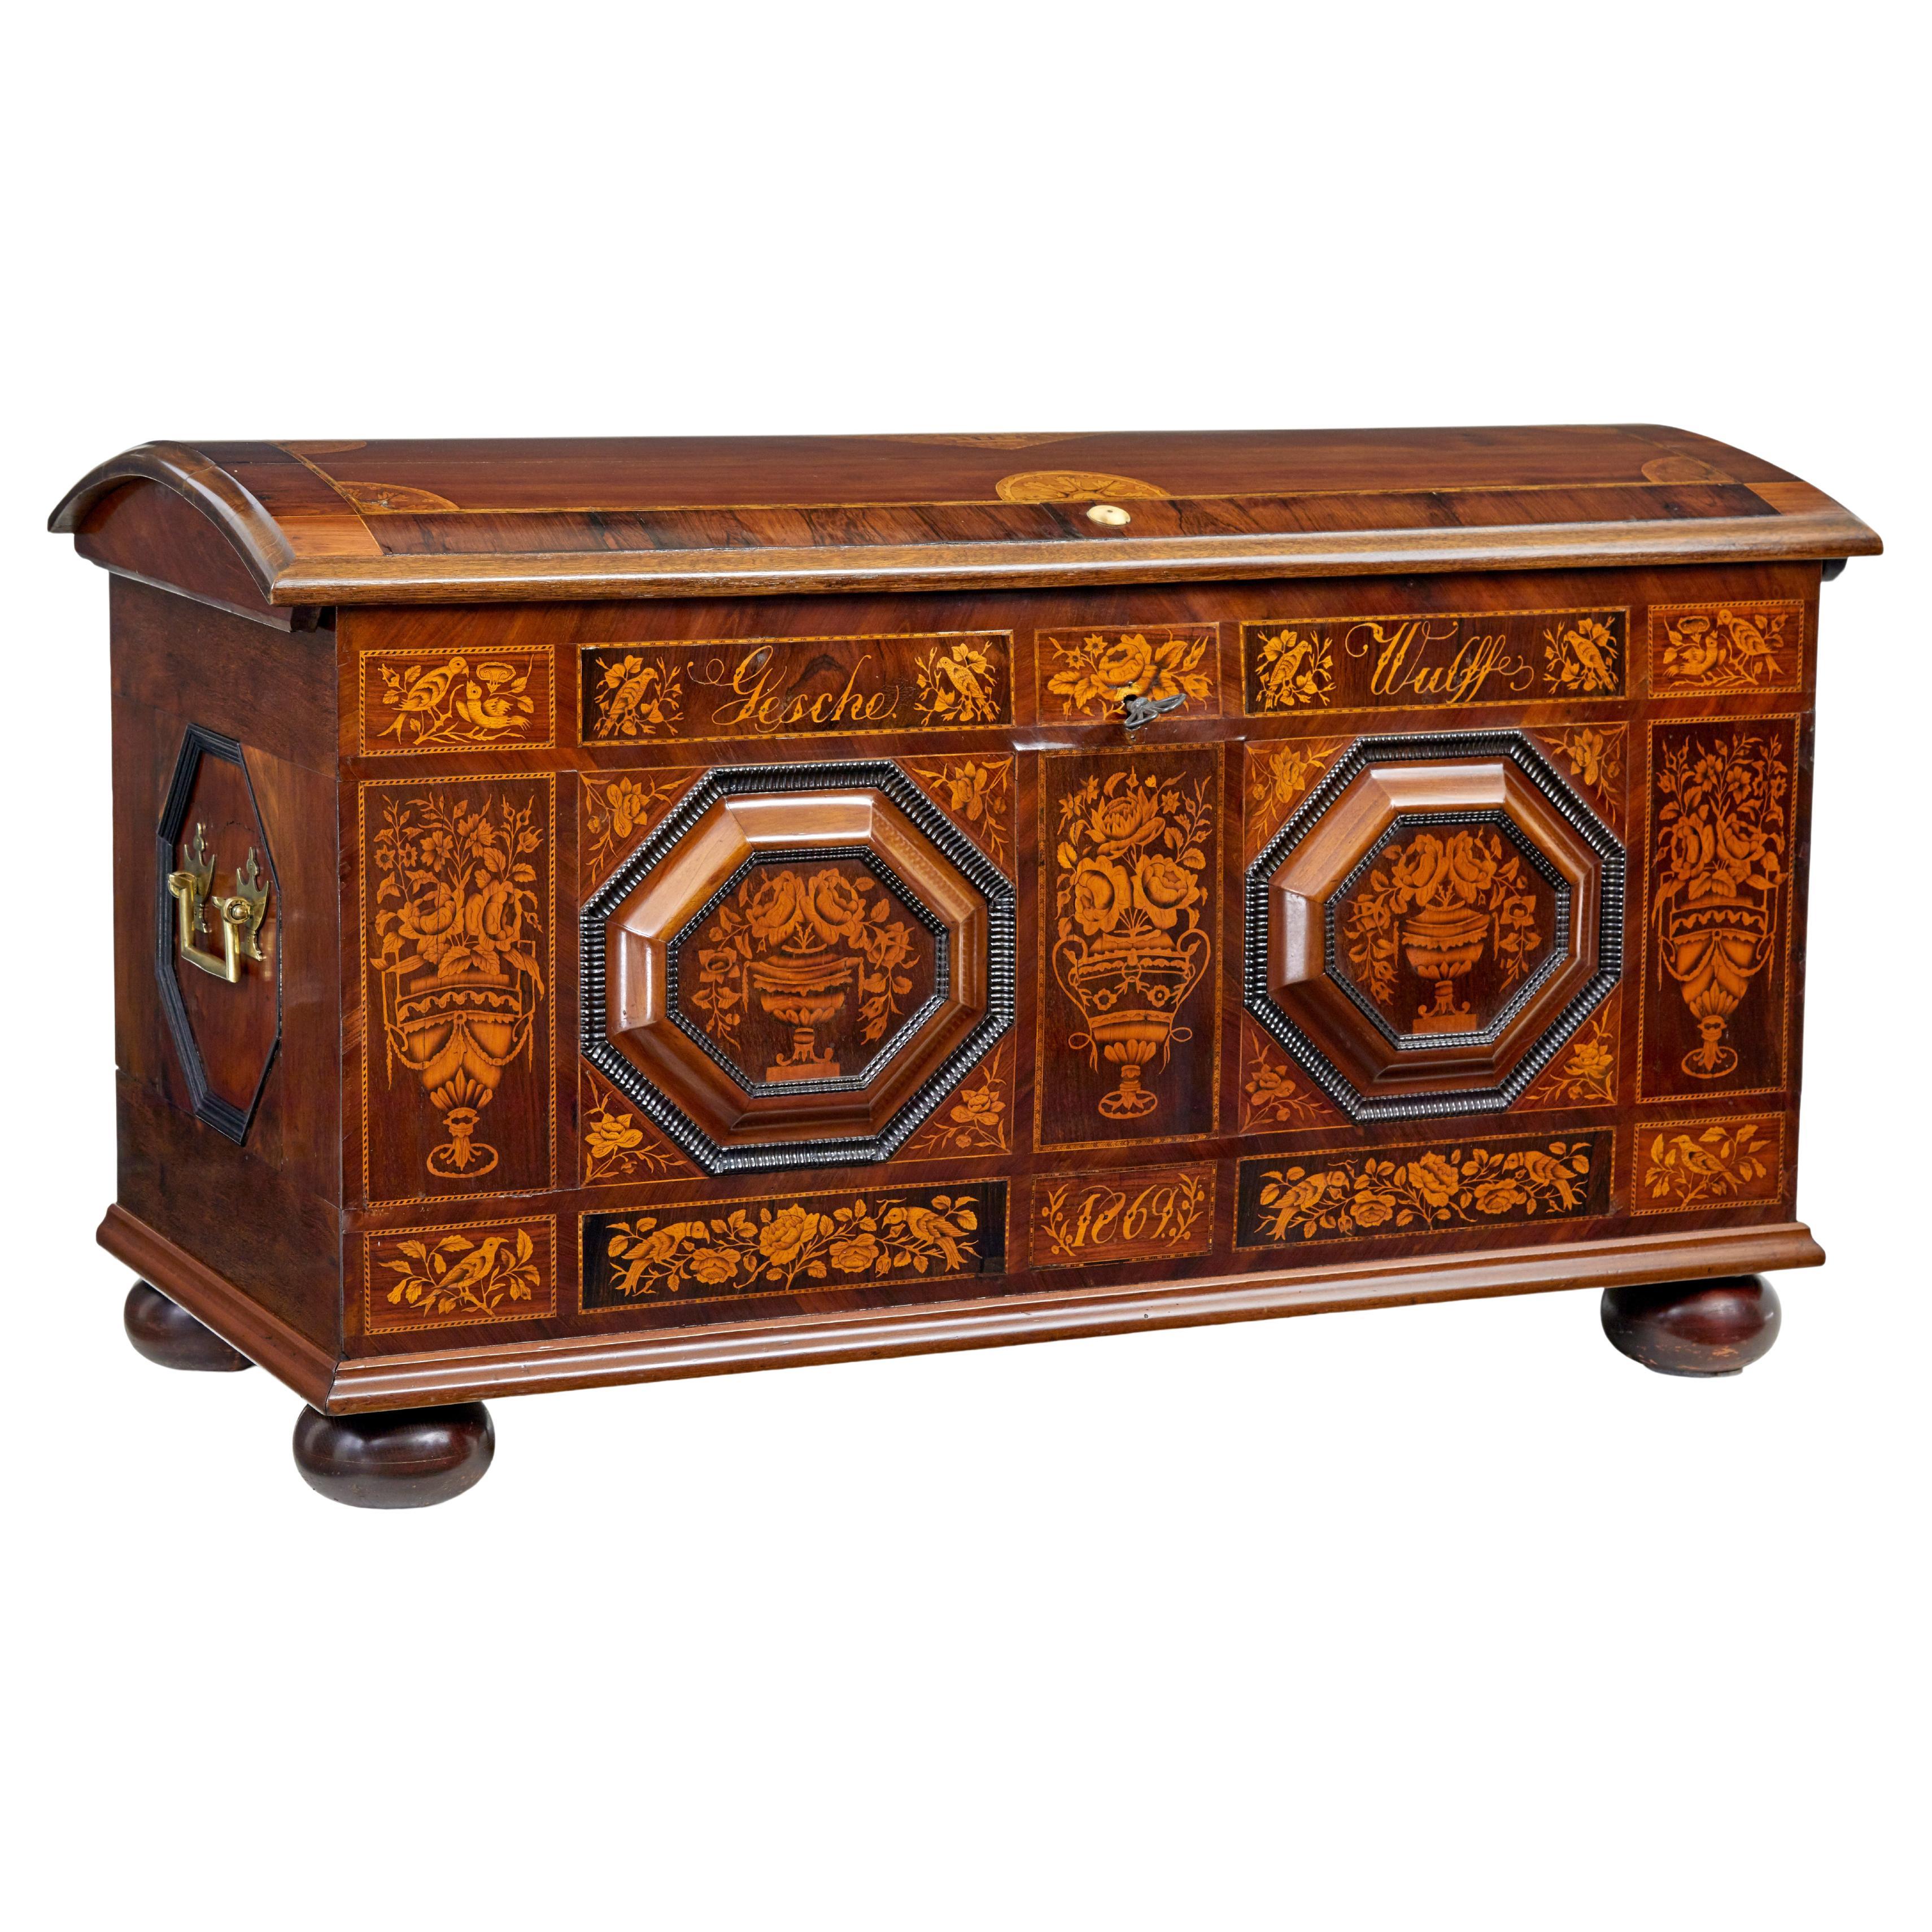 Mid 19th century profusely inlaid continental walnut dome coffer For Sale